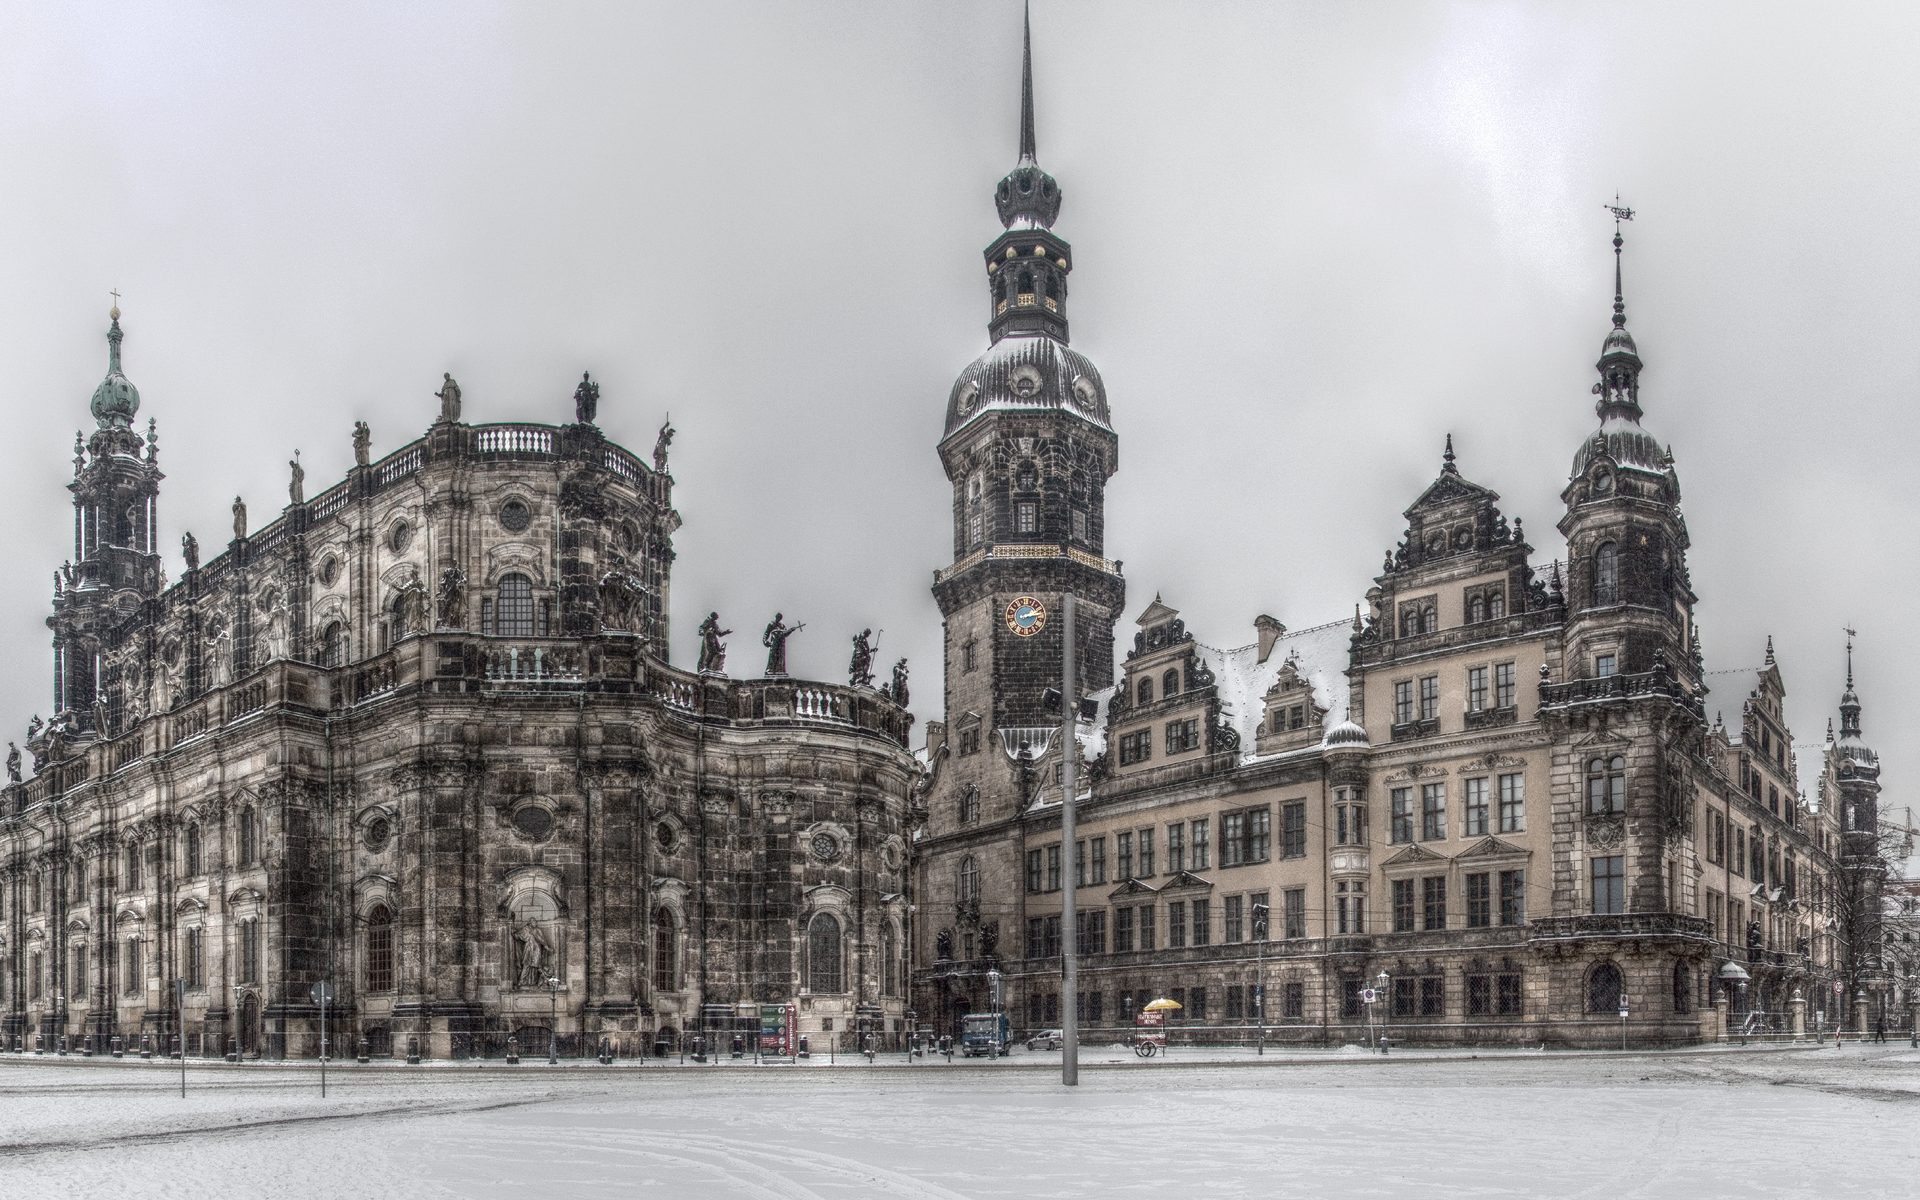 Cathedral of the Holy Trinity in Dresden, Germany